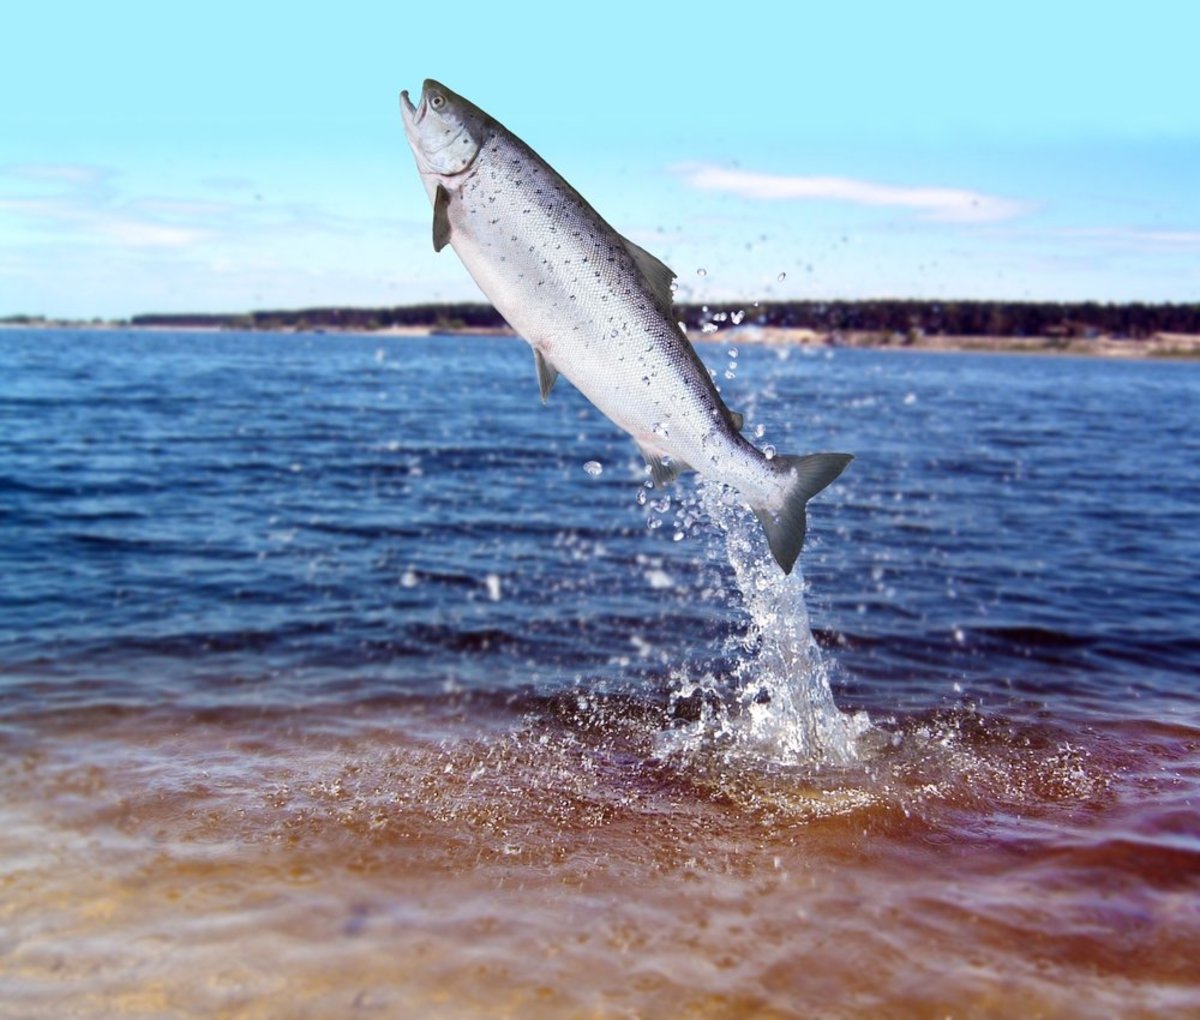 Genetically Modified Salmon Banned from Import... For Now